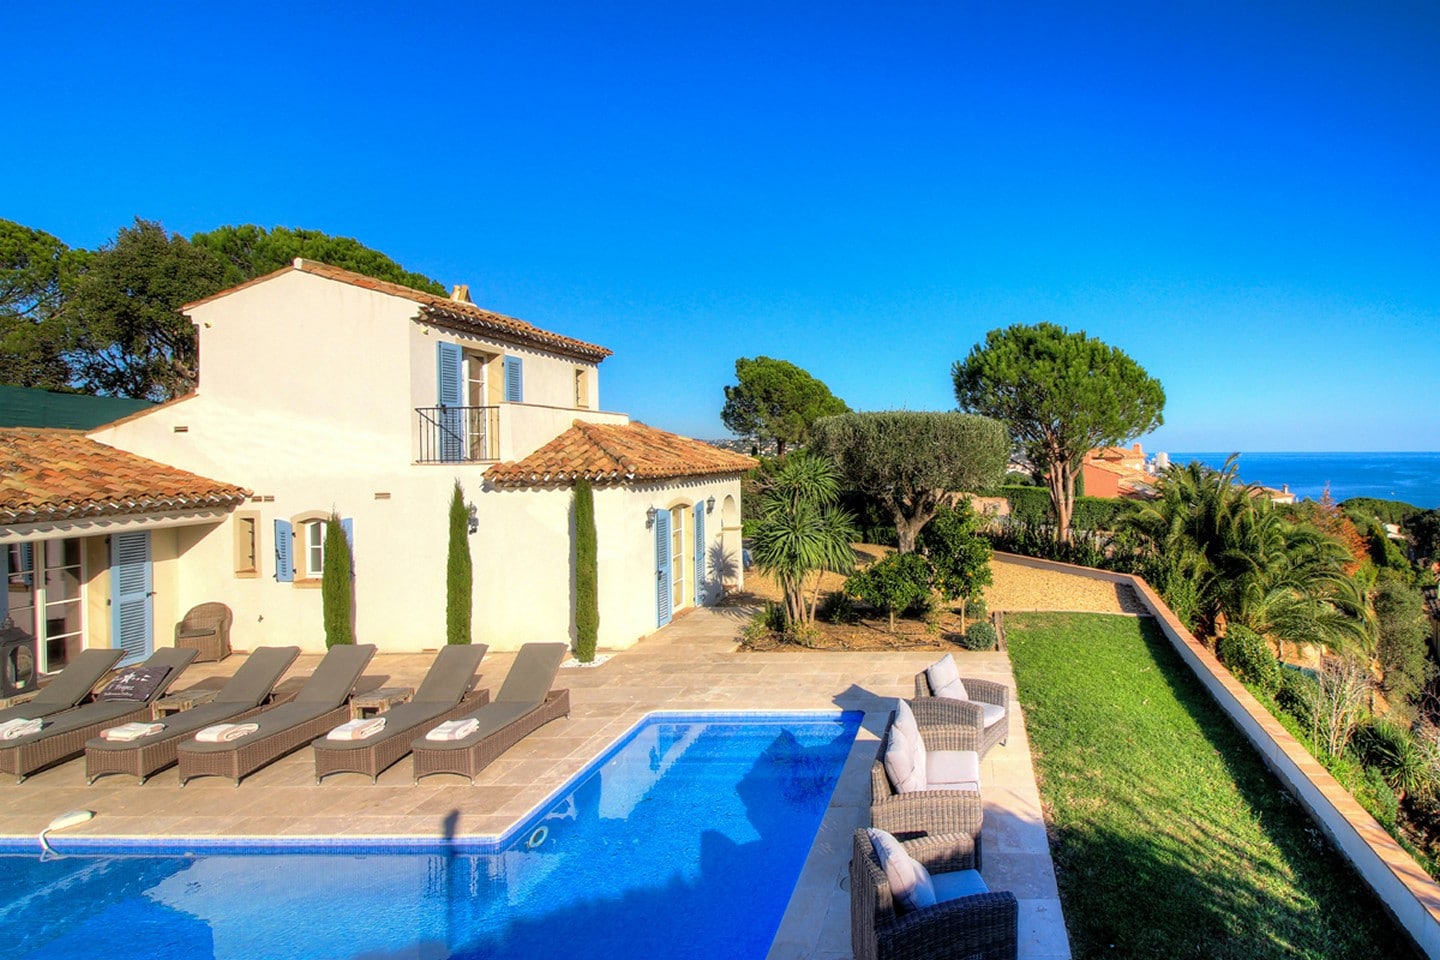 Property Image 1 - Traditional Provencal villa with 5 bedrooms and sea view close to Sainte Maxime beach